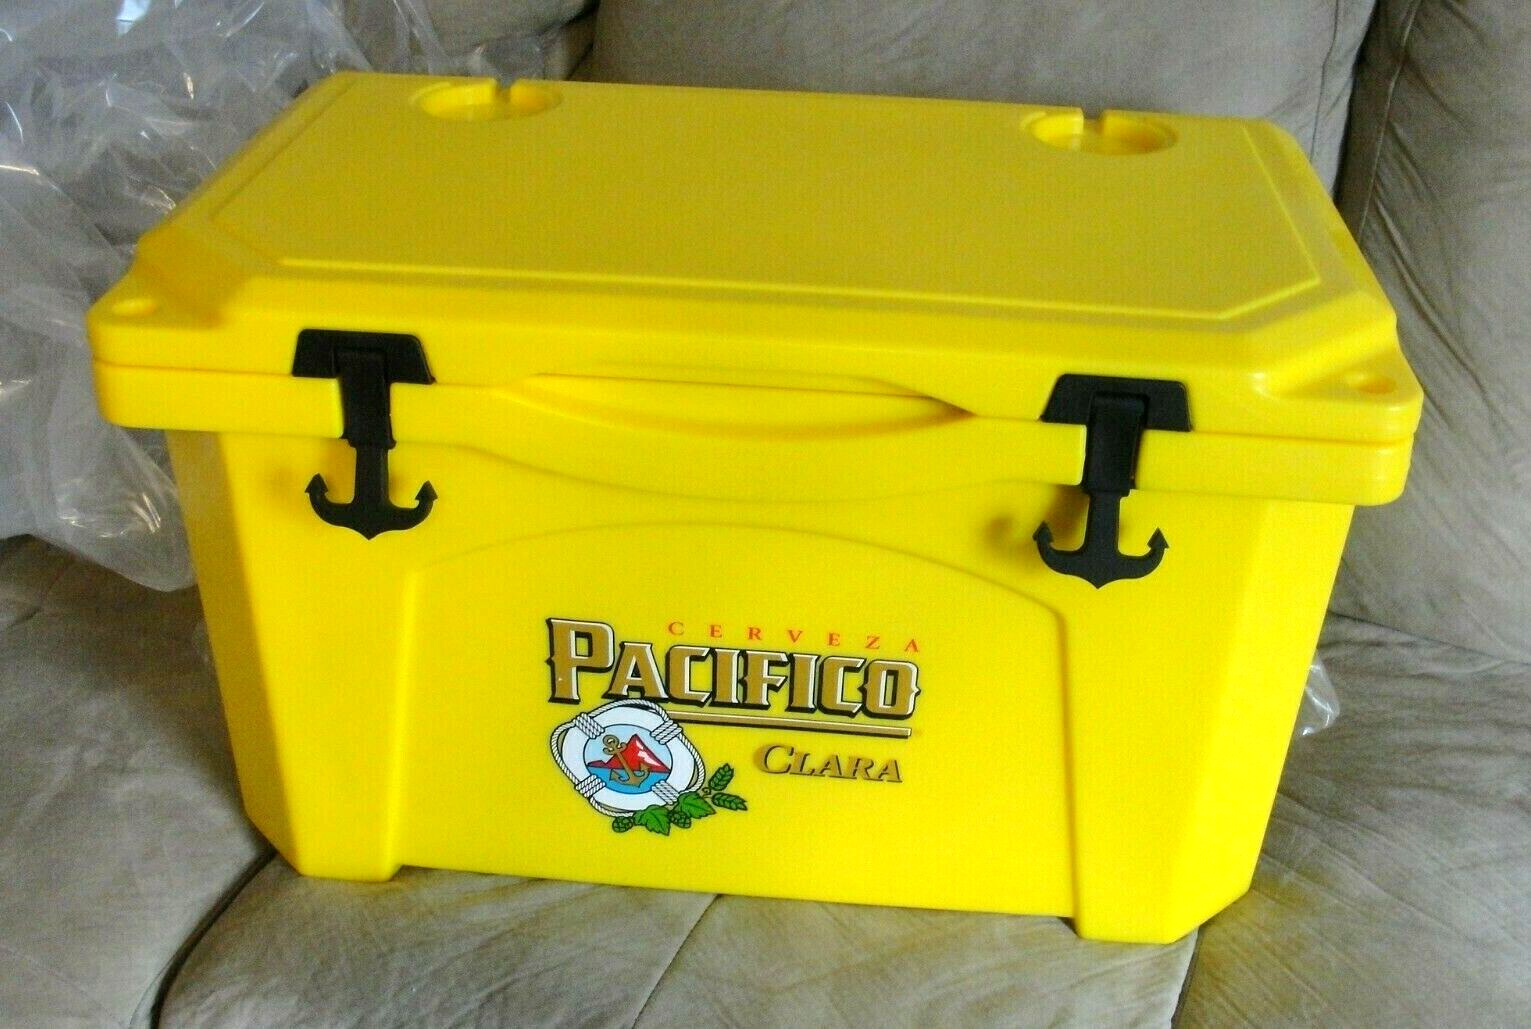 PACIFICO CLARA BEER GRIZZLY 40 QT BEVERAGE COOLER CHEST 🍺 YELLOW BRAND NEW USA